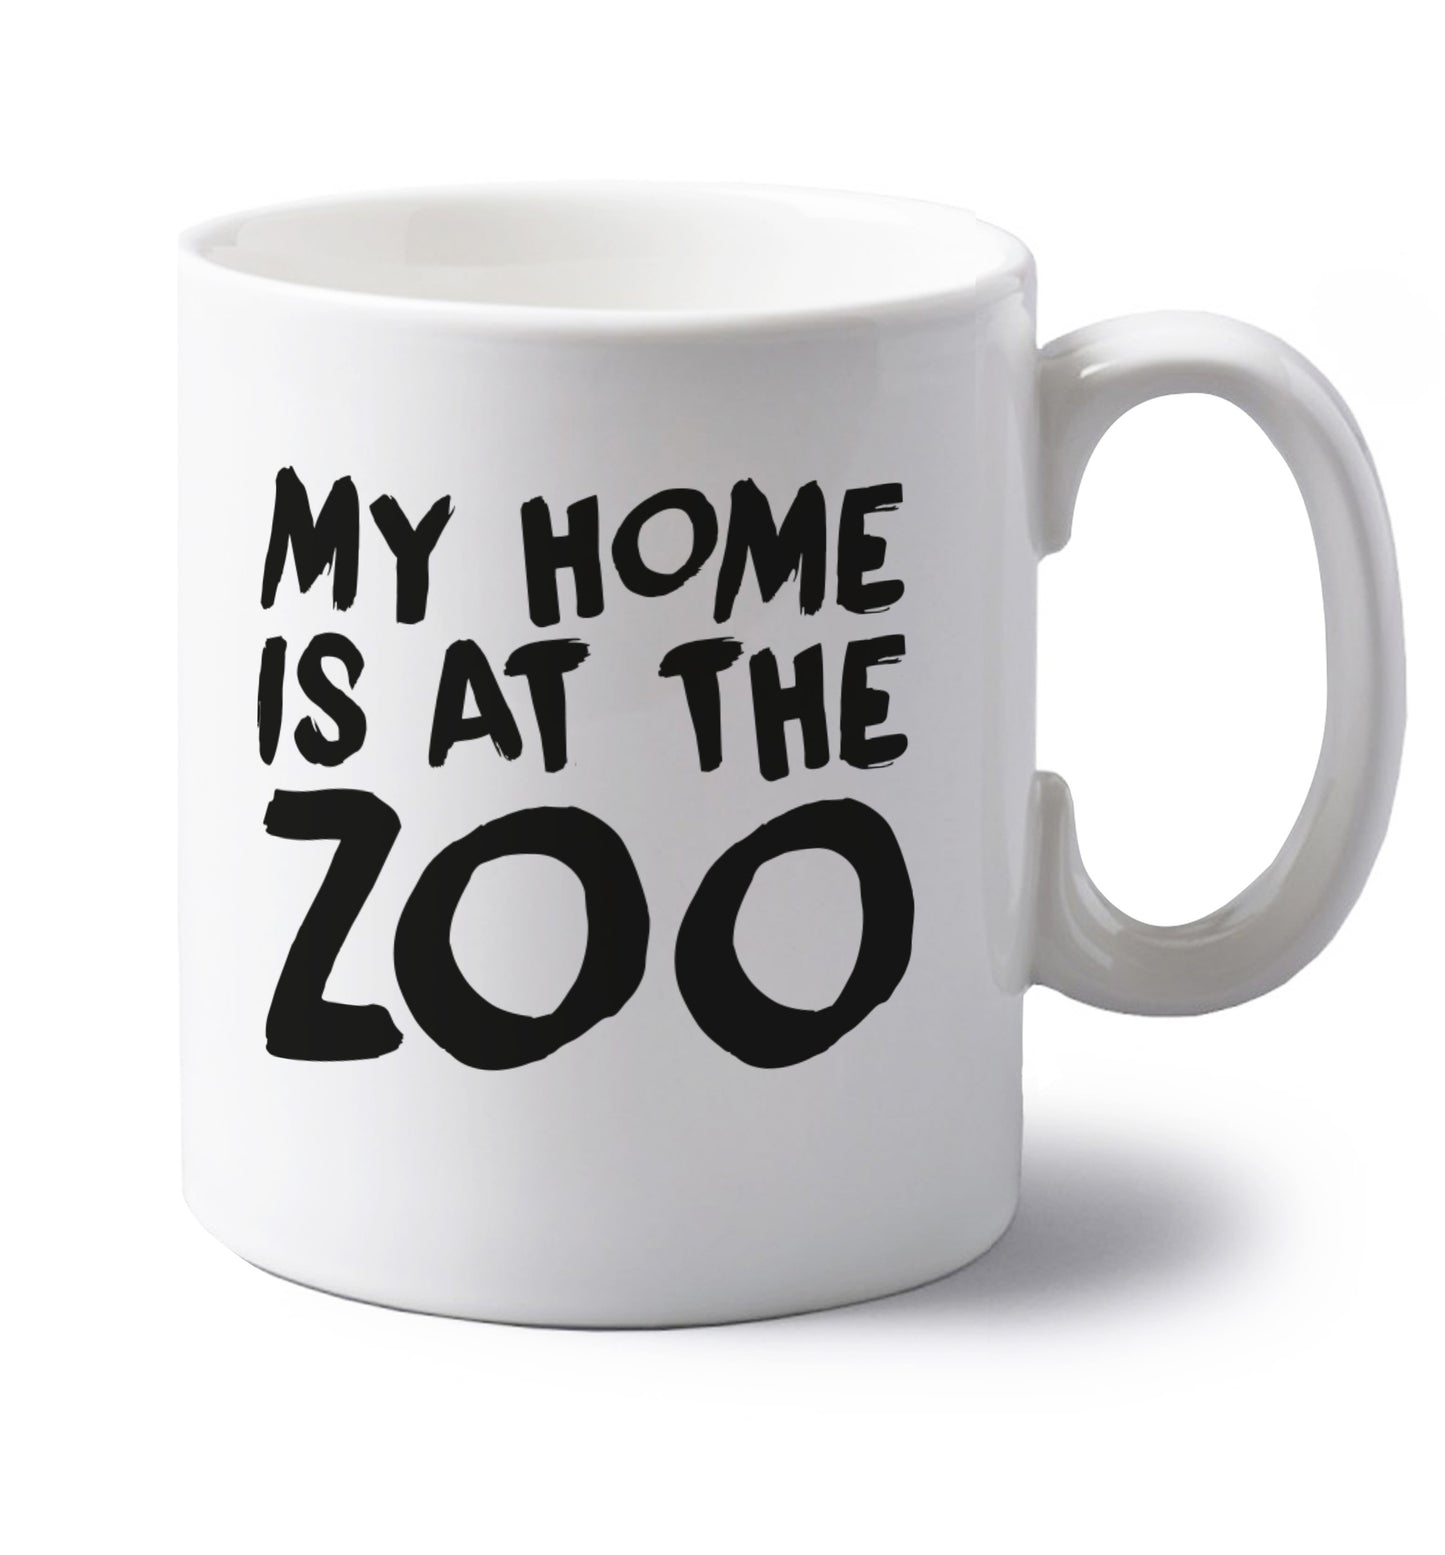 My home is at the zoo left handed white ceramic mug 